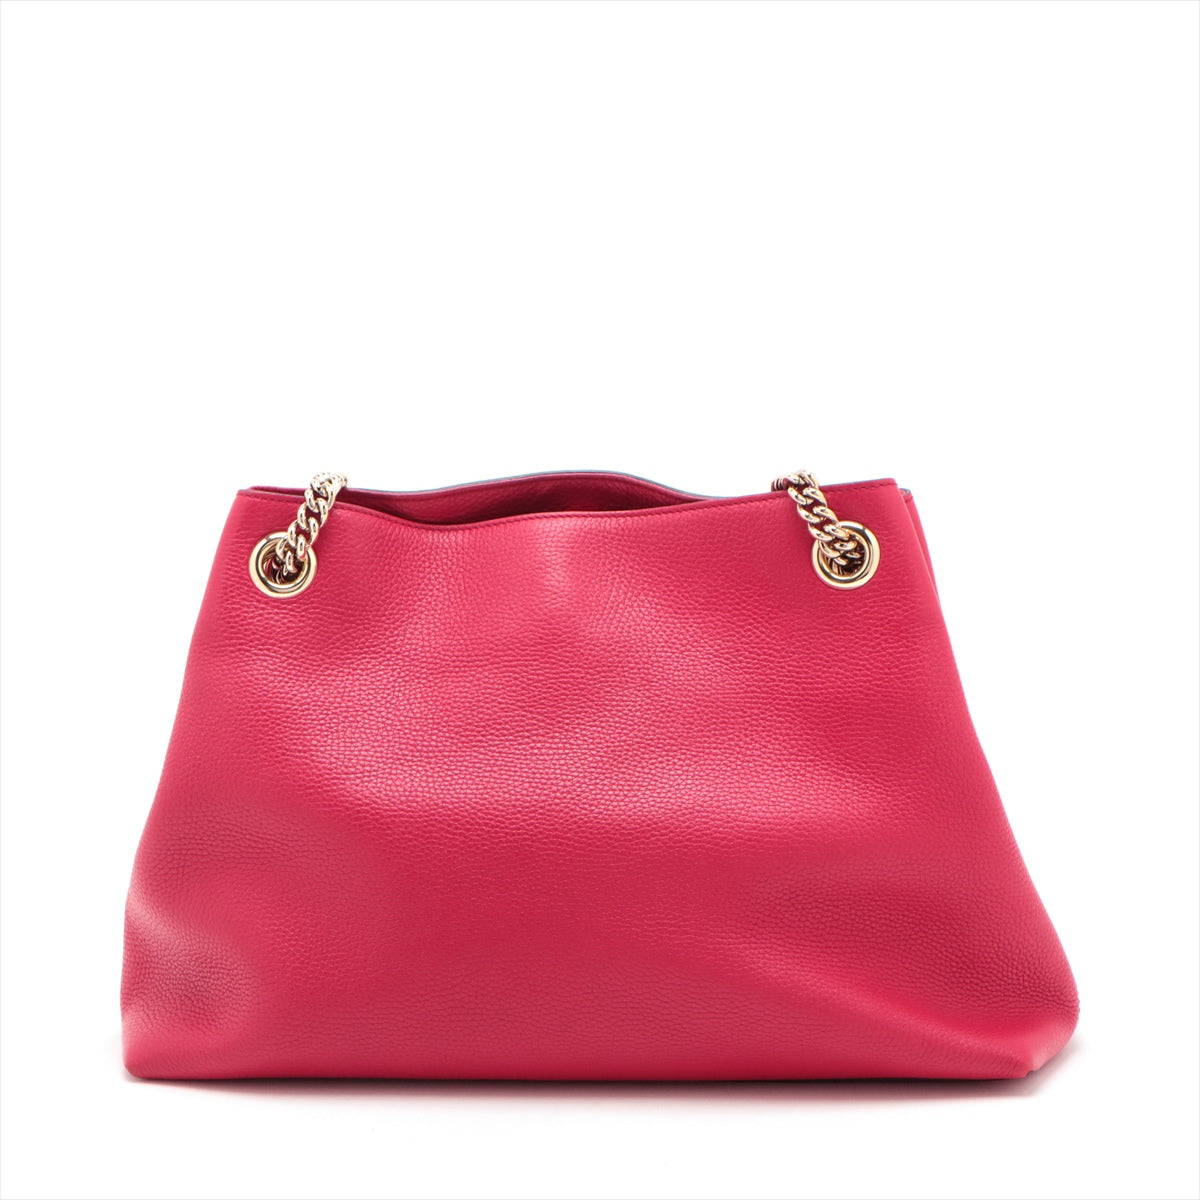 Gucci Soho Leather Chantantot Top Bag Red 536196